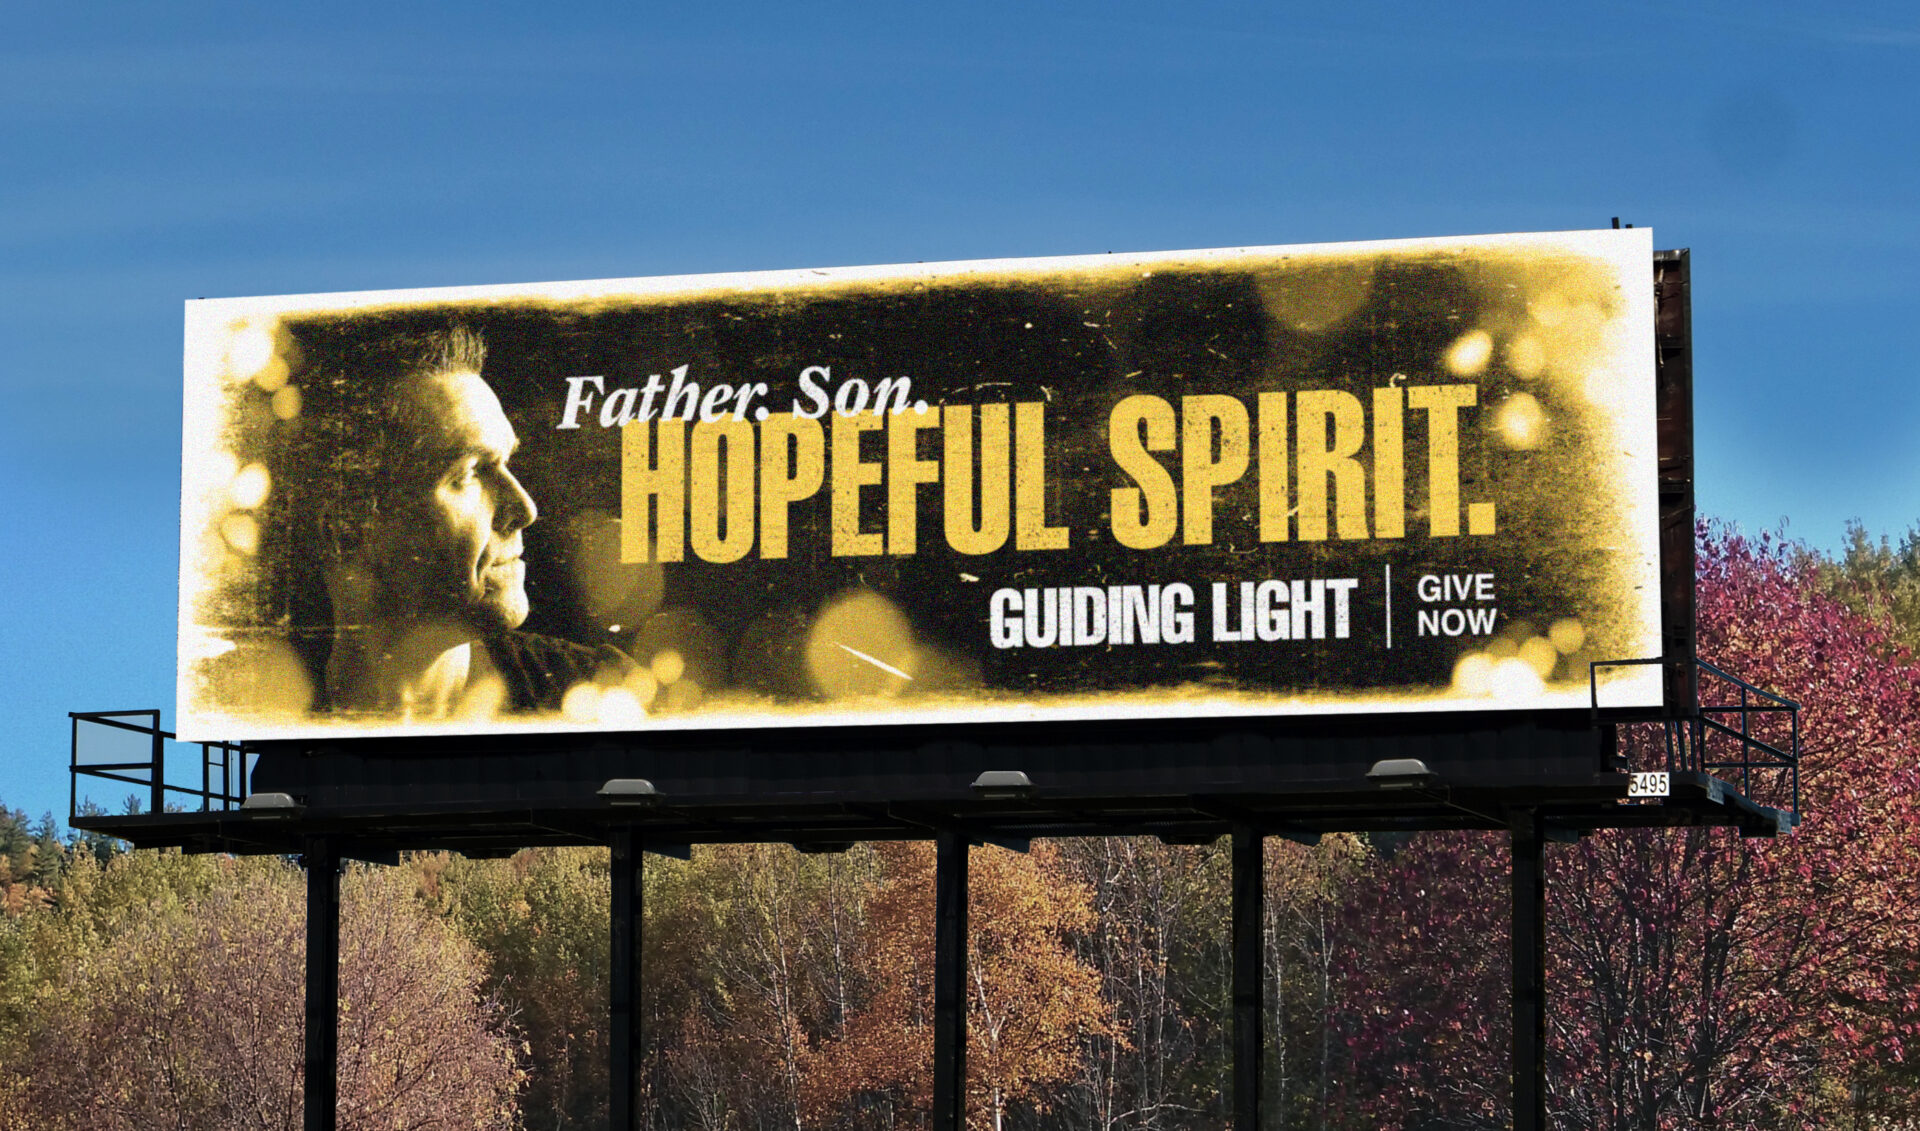 Out of home bulletin for Guiding Light. Father. Son. Hopeful Spirit.